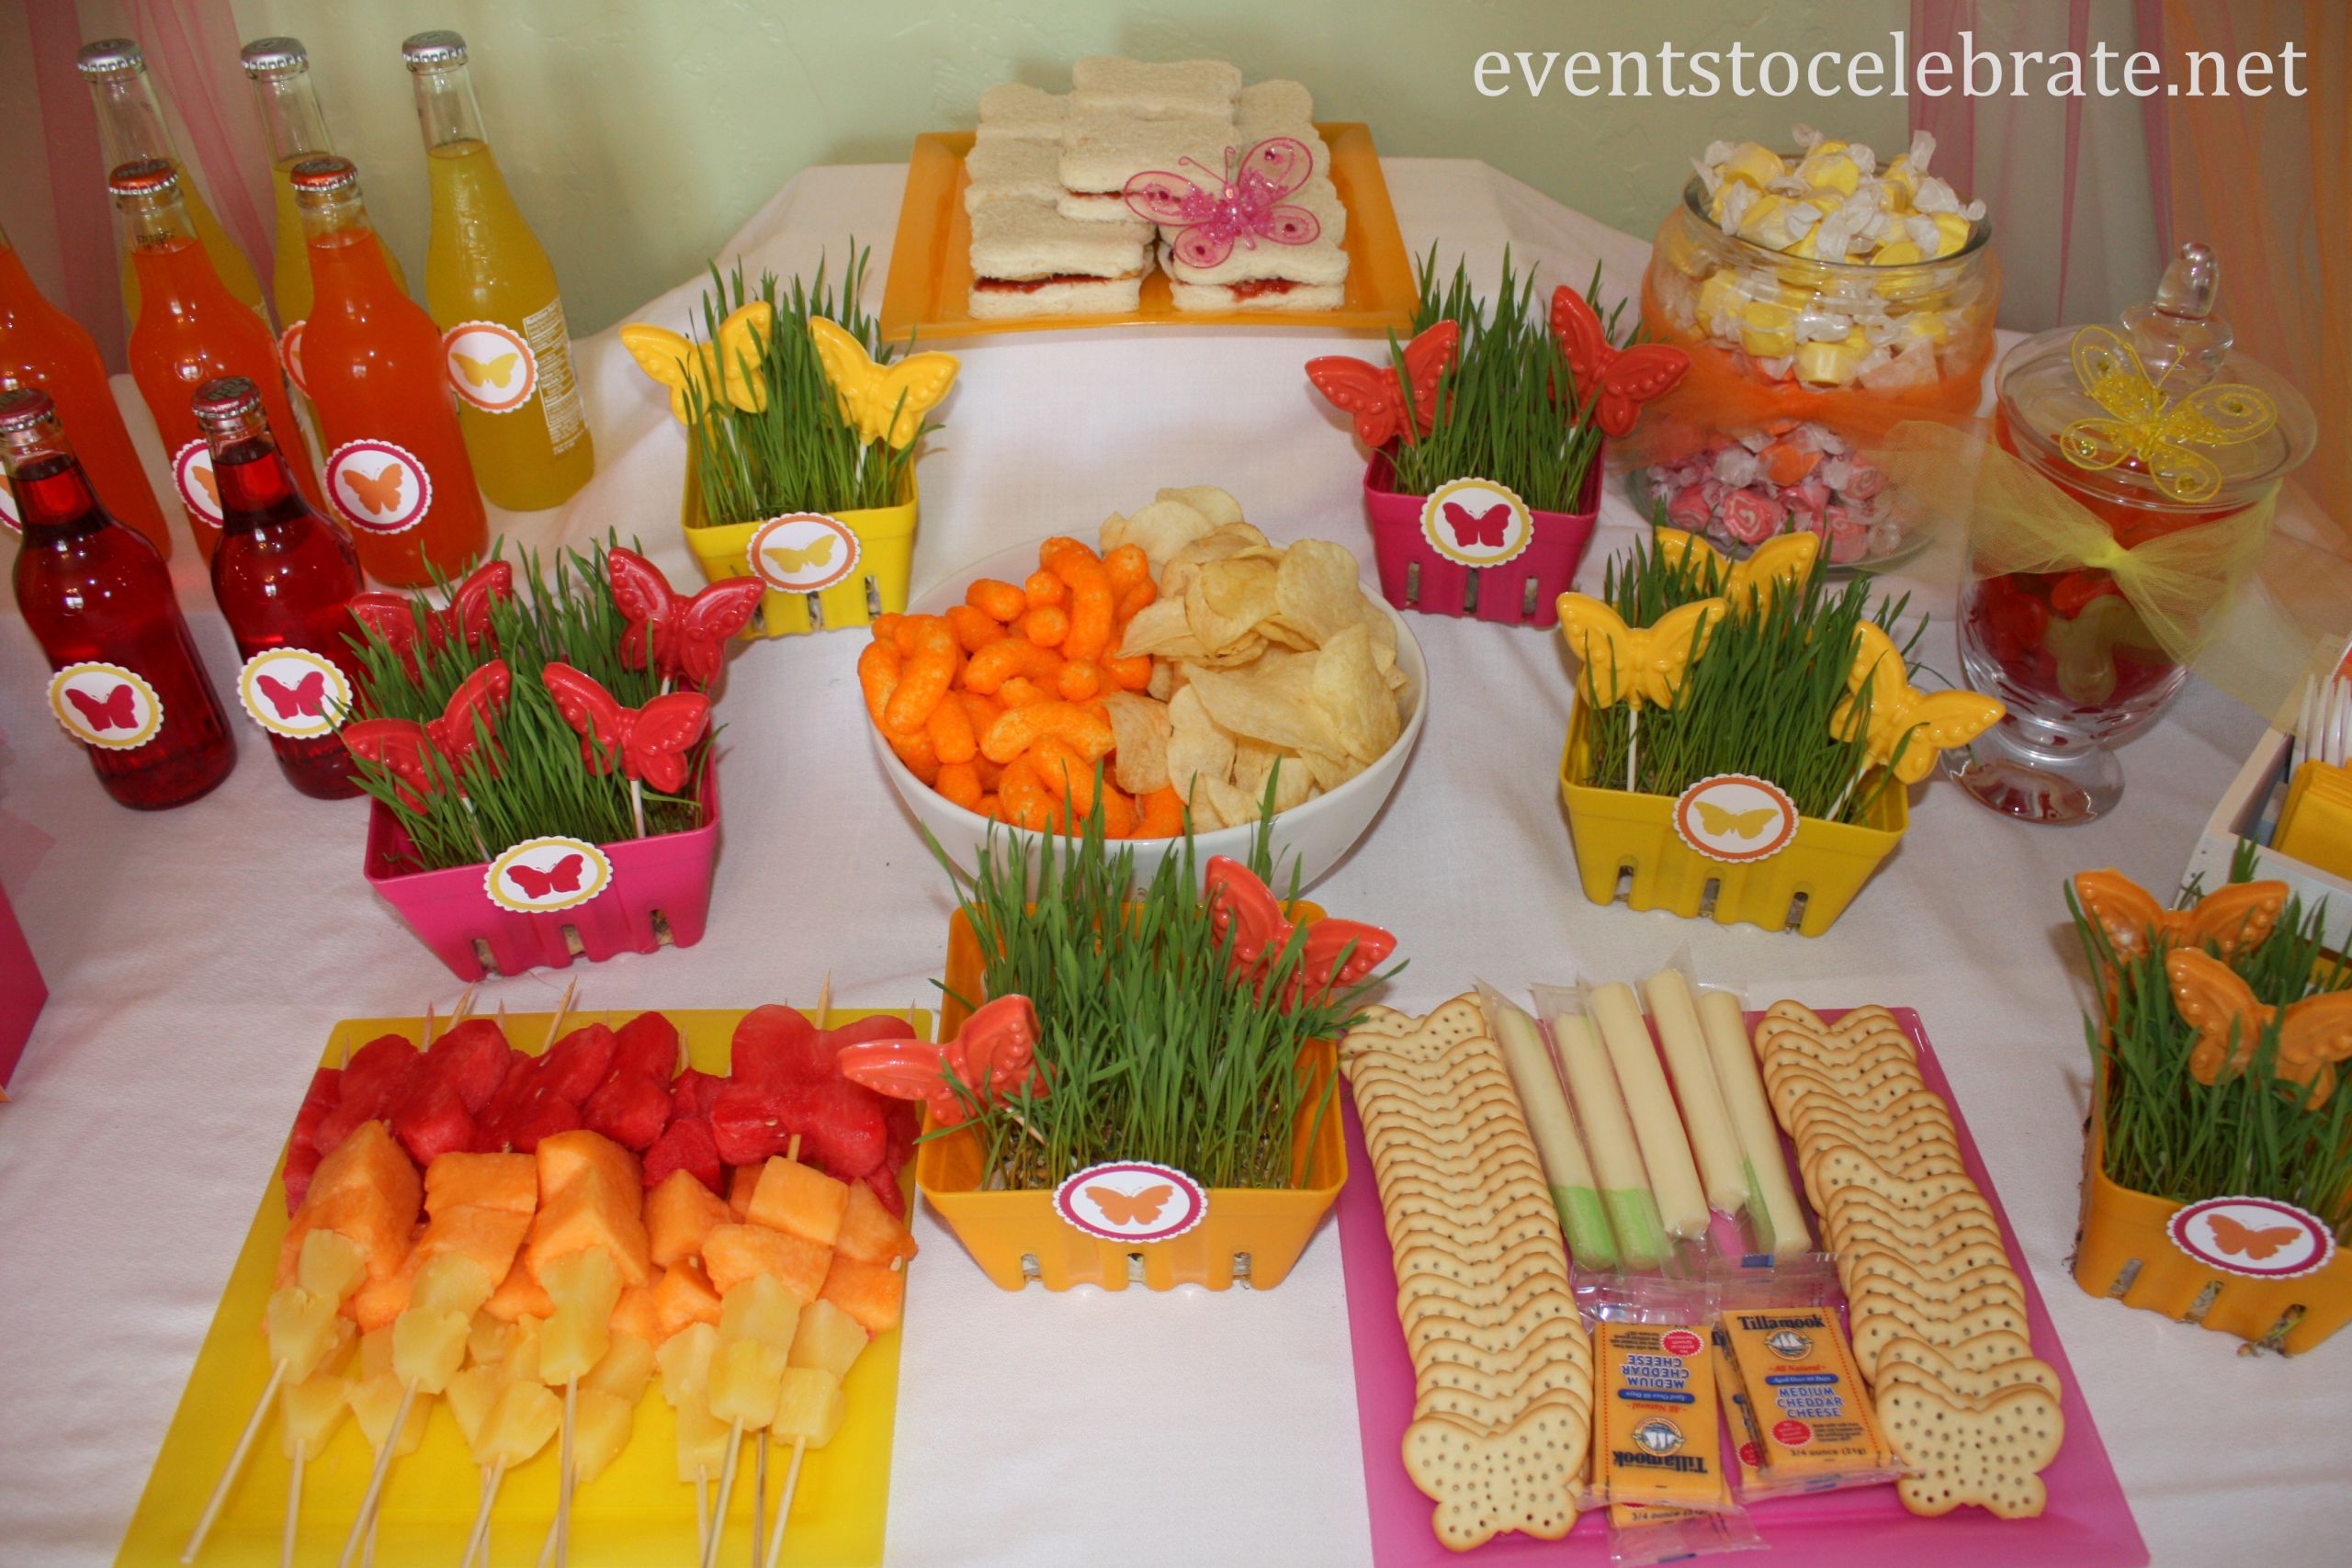 Party Food Display Ideas
 butterfly food ideas Archives events to CELEBRATE